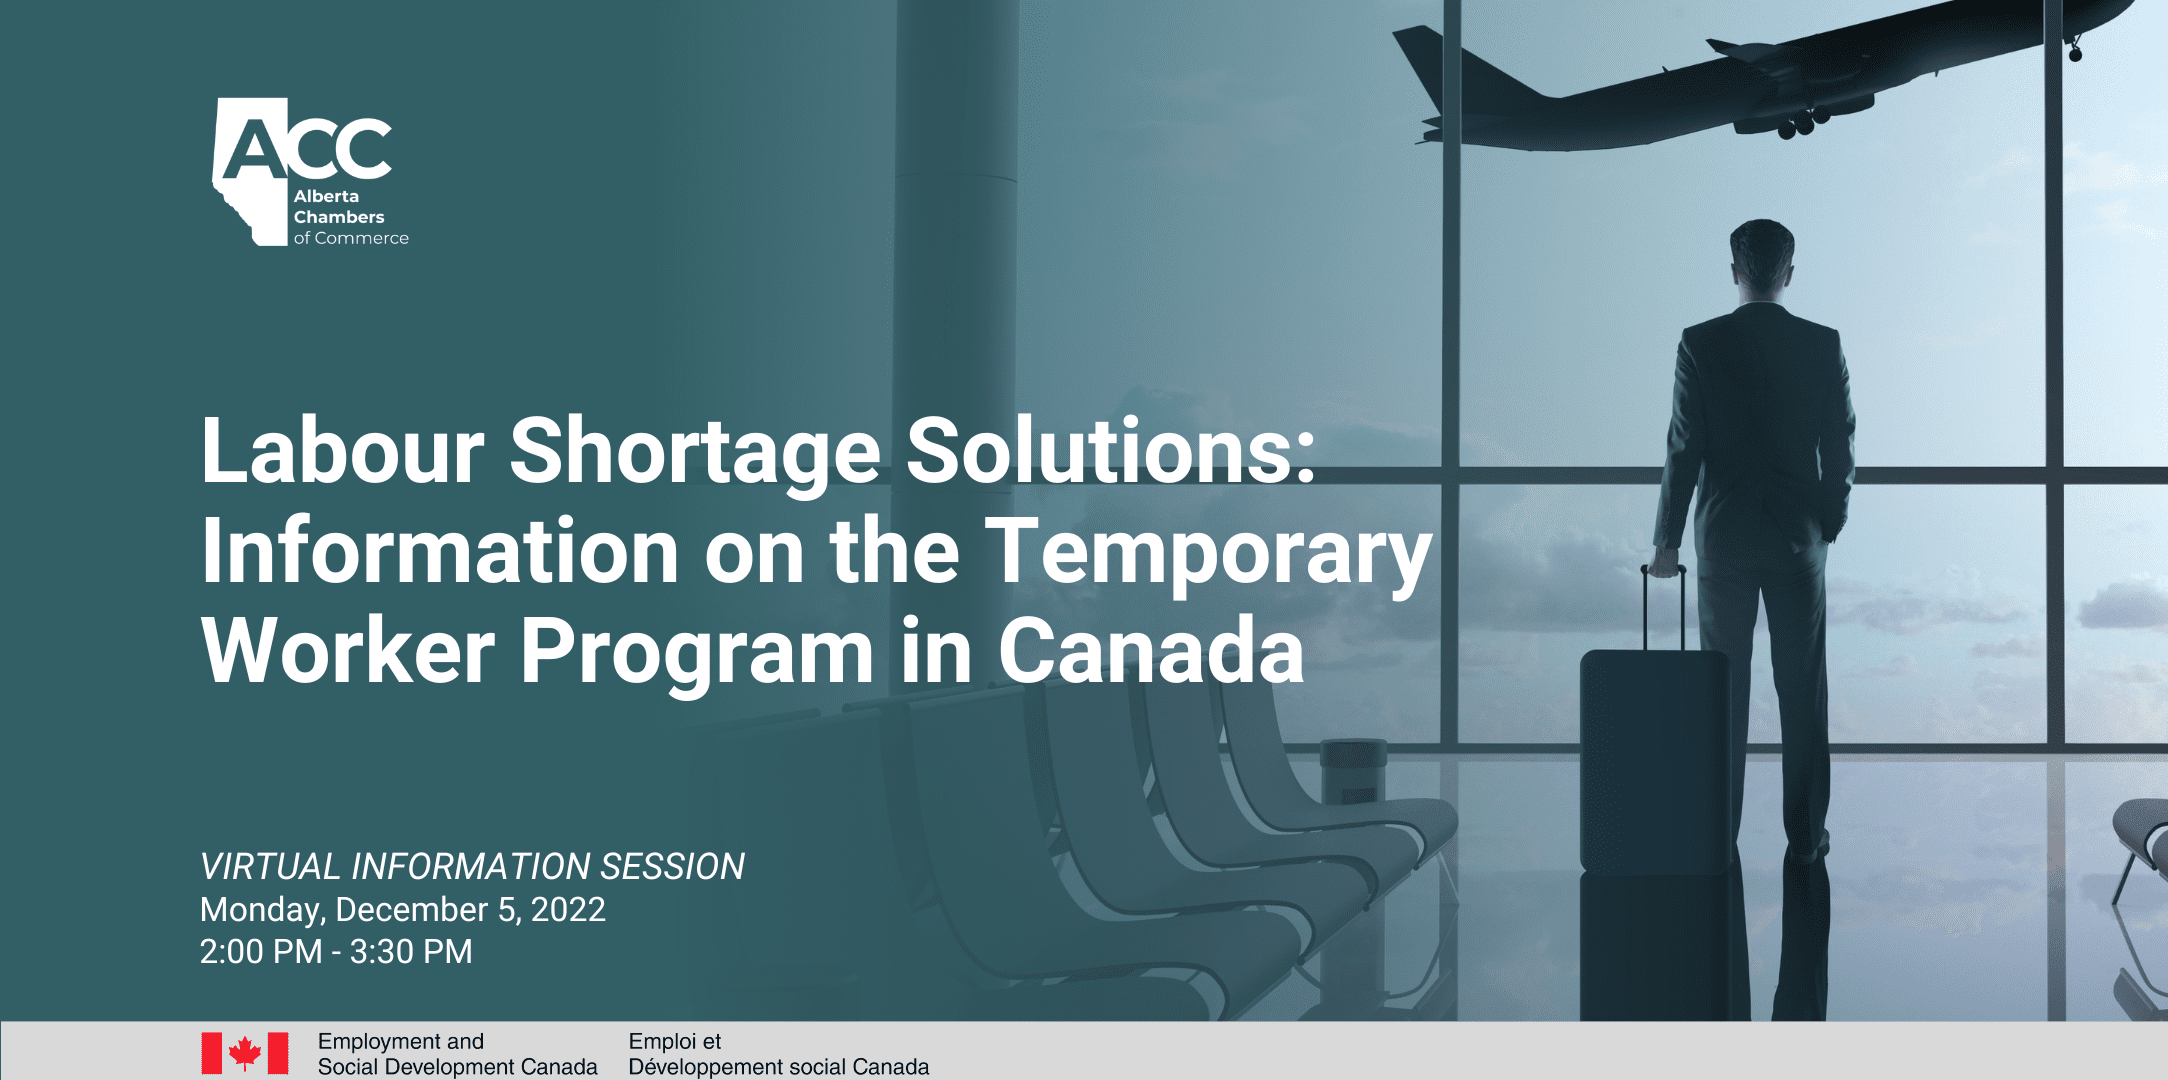 Labour Shortage Solutions: Information on the Temporary Worker Program in Canada image